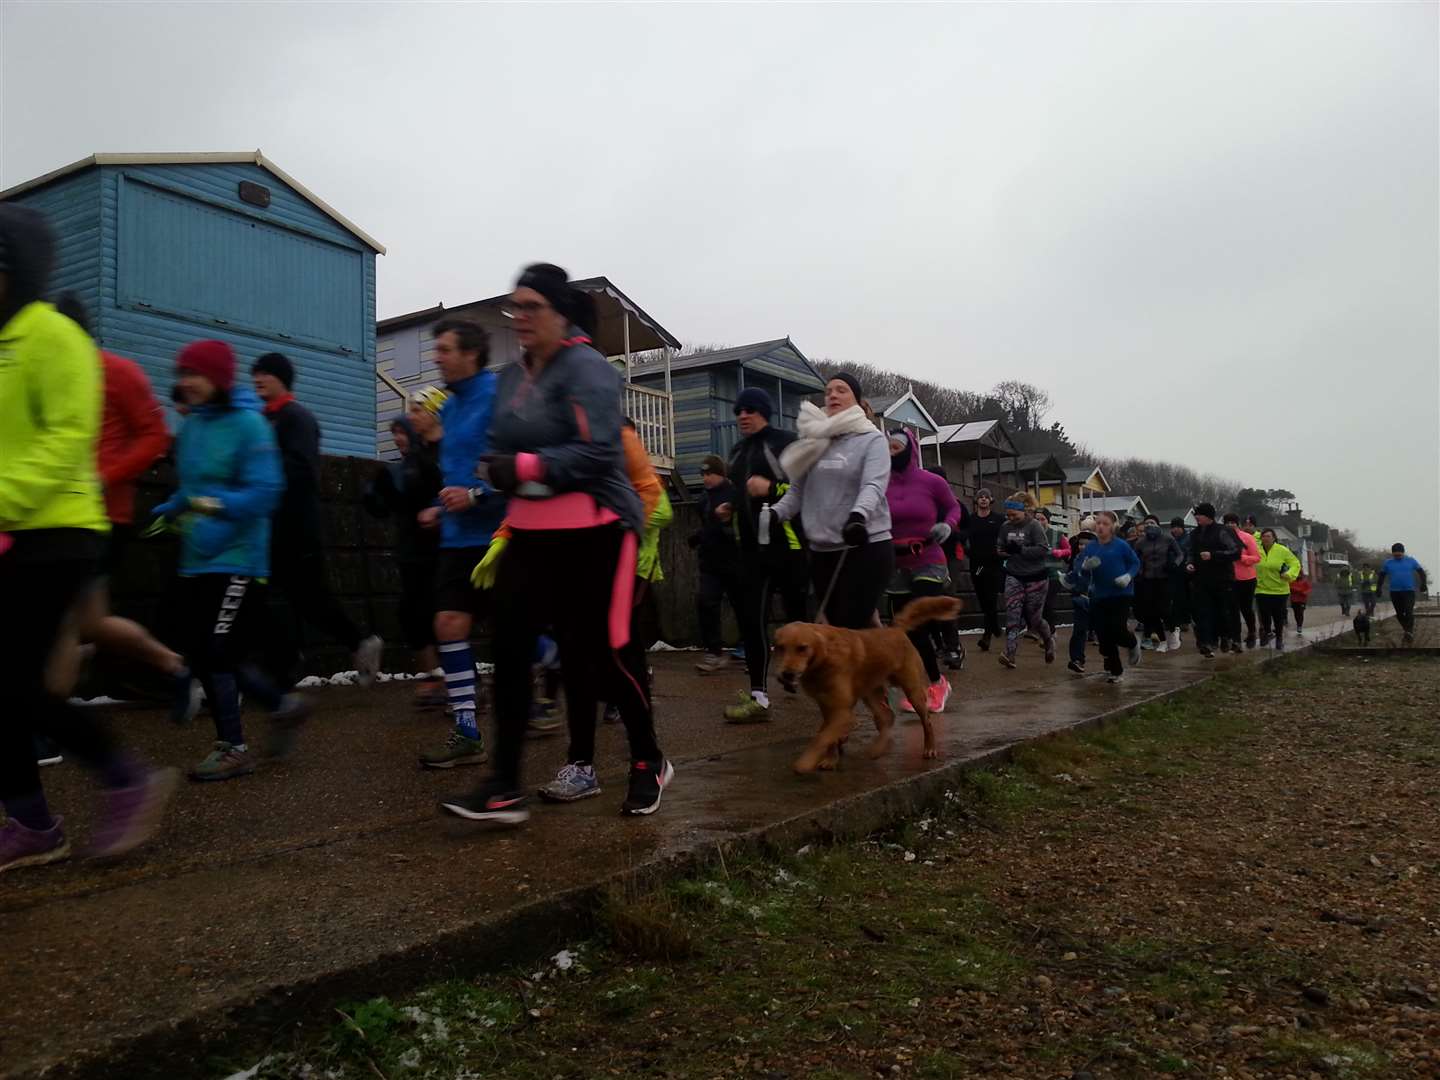 Whitstable parkrunners brave freezing conditions on Tankerton seafront